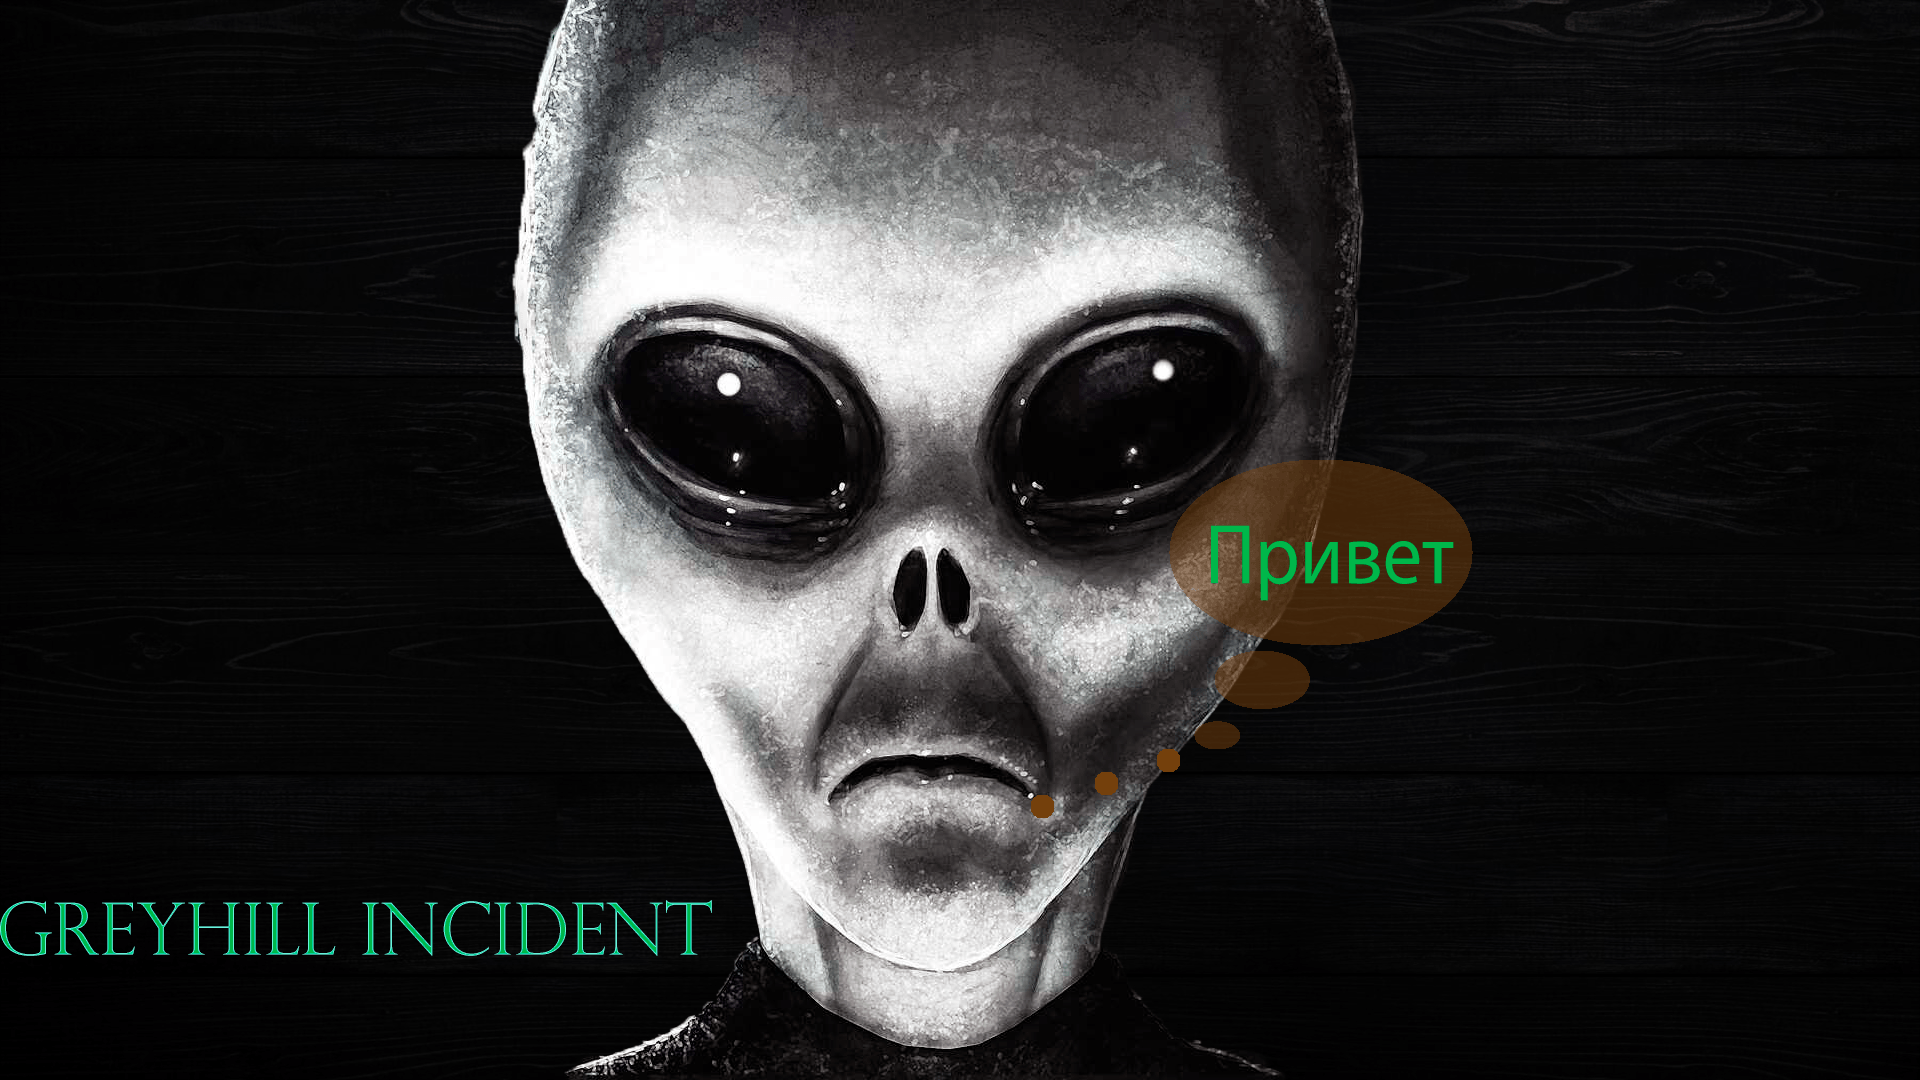 Greyhill incident. Greyhill incident Скриншоты. Greyhill incident меню. Рецензии Greyhill incident. Greyhill incident: abducted Edition (ps5).